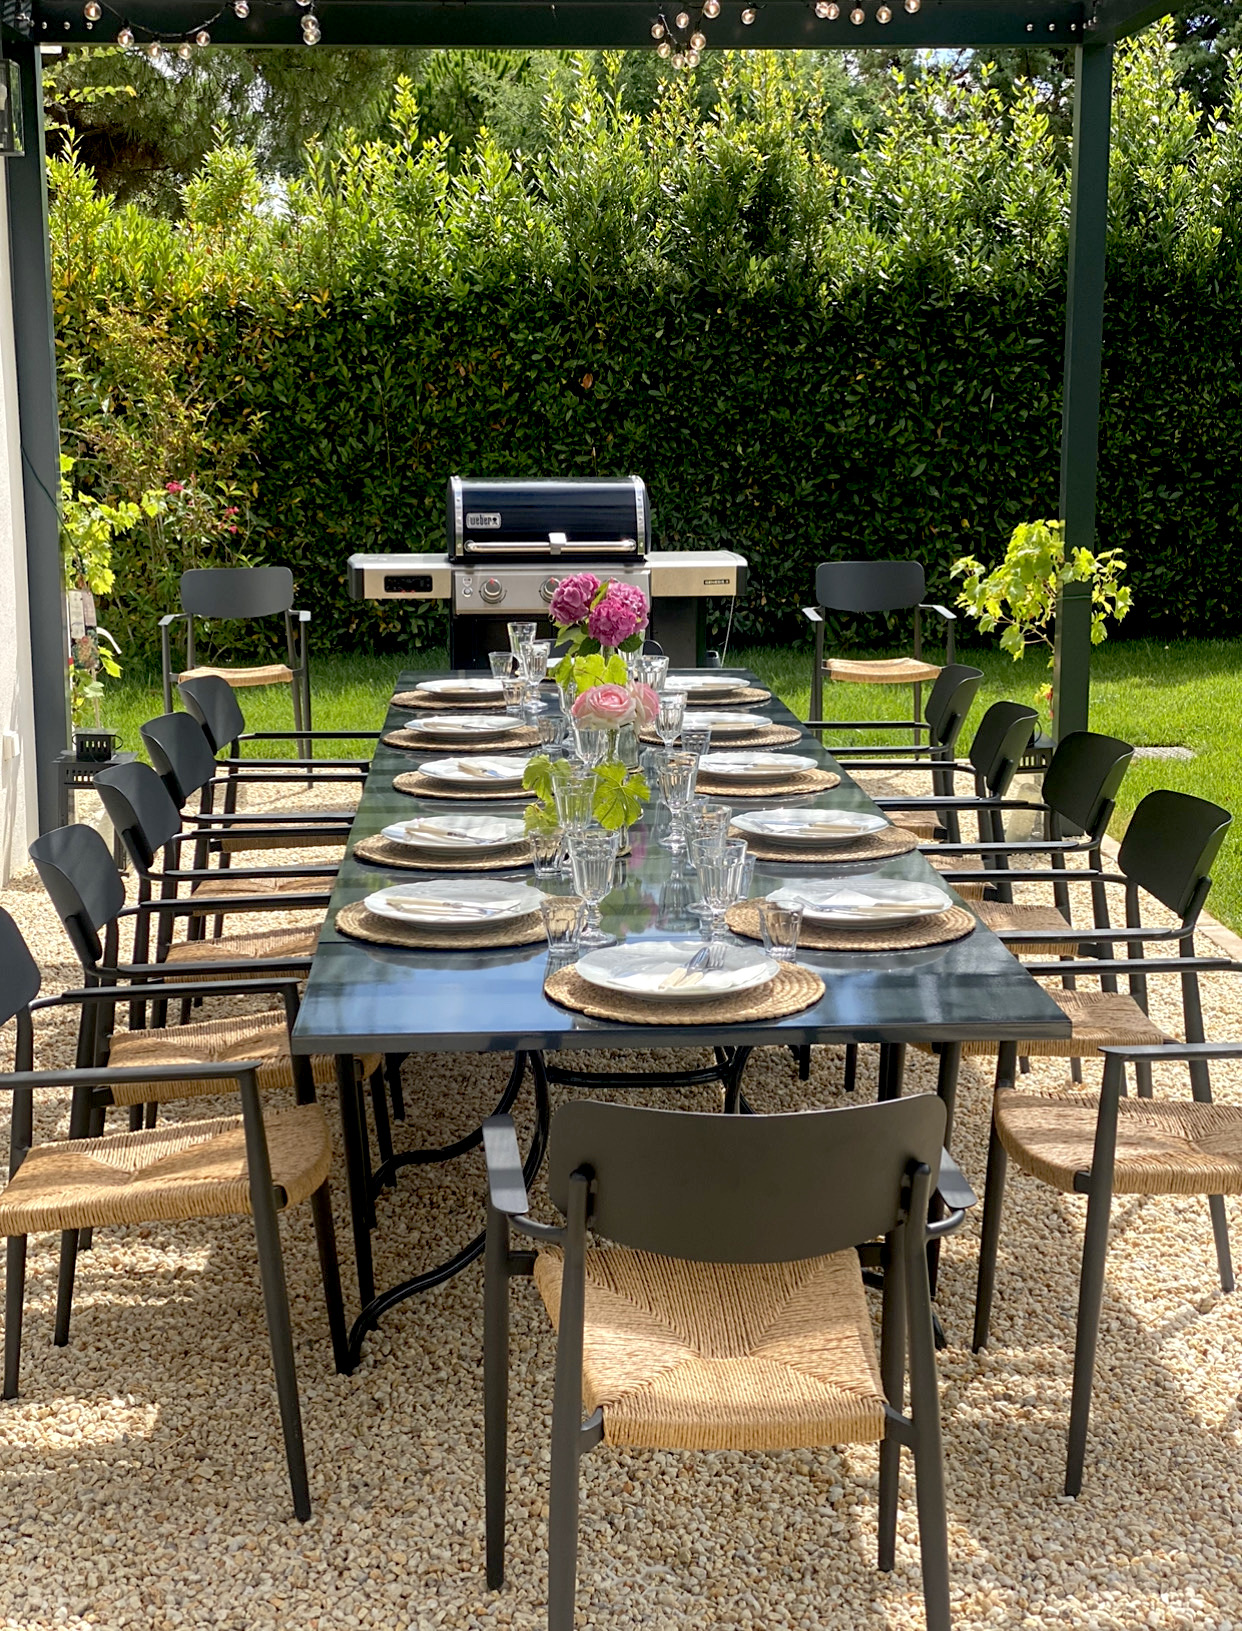 Vertical Image of Dining Pergola with table set and BBQ in the background